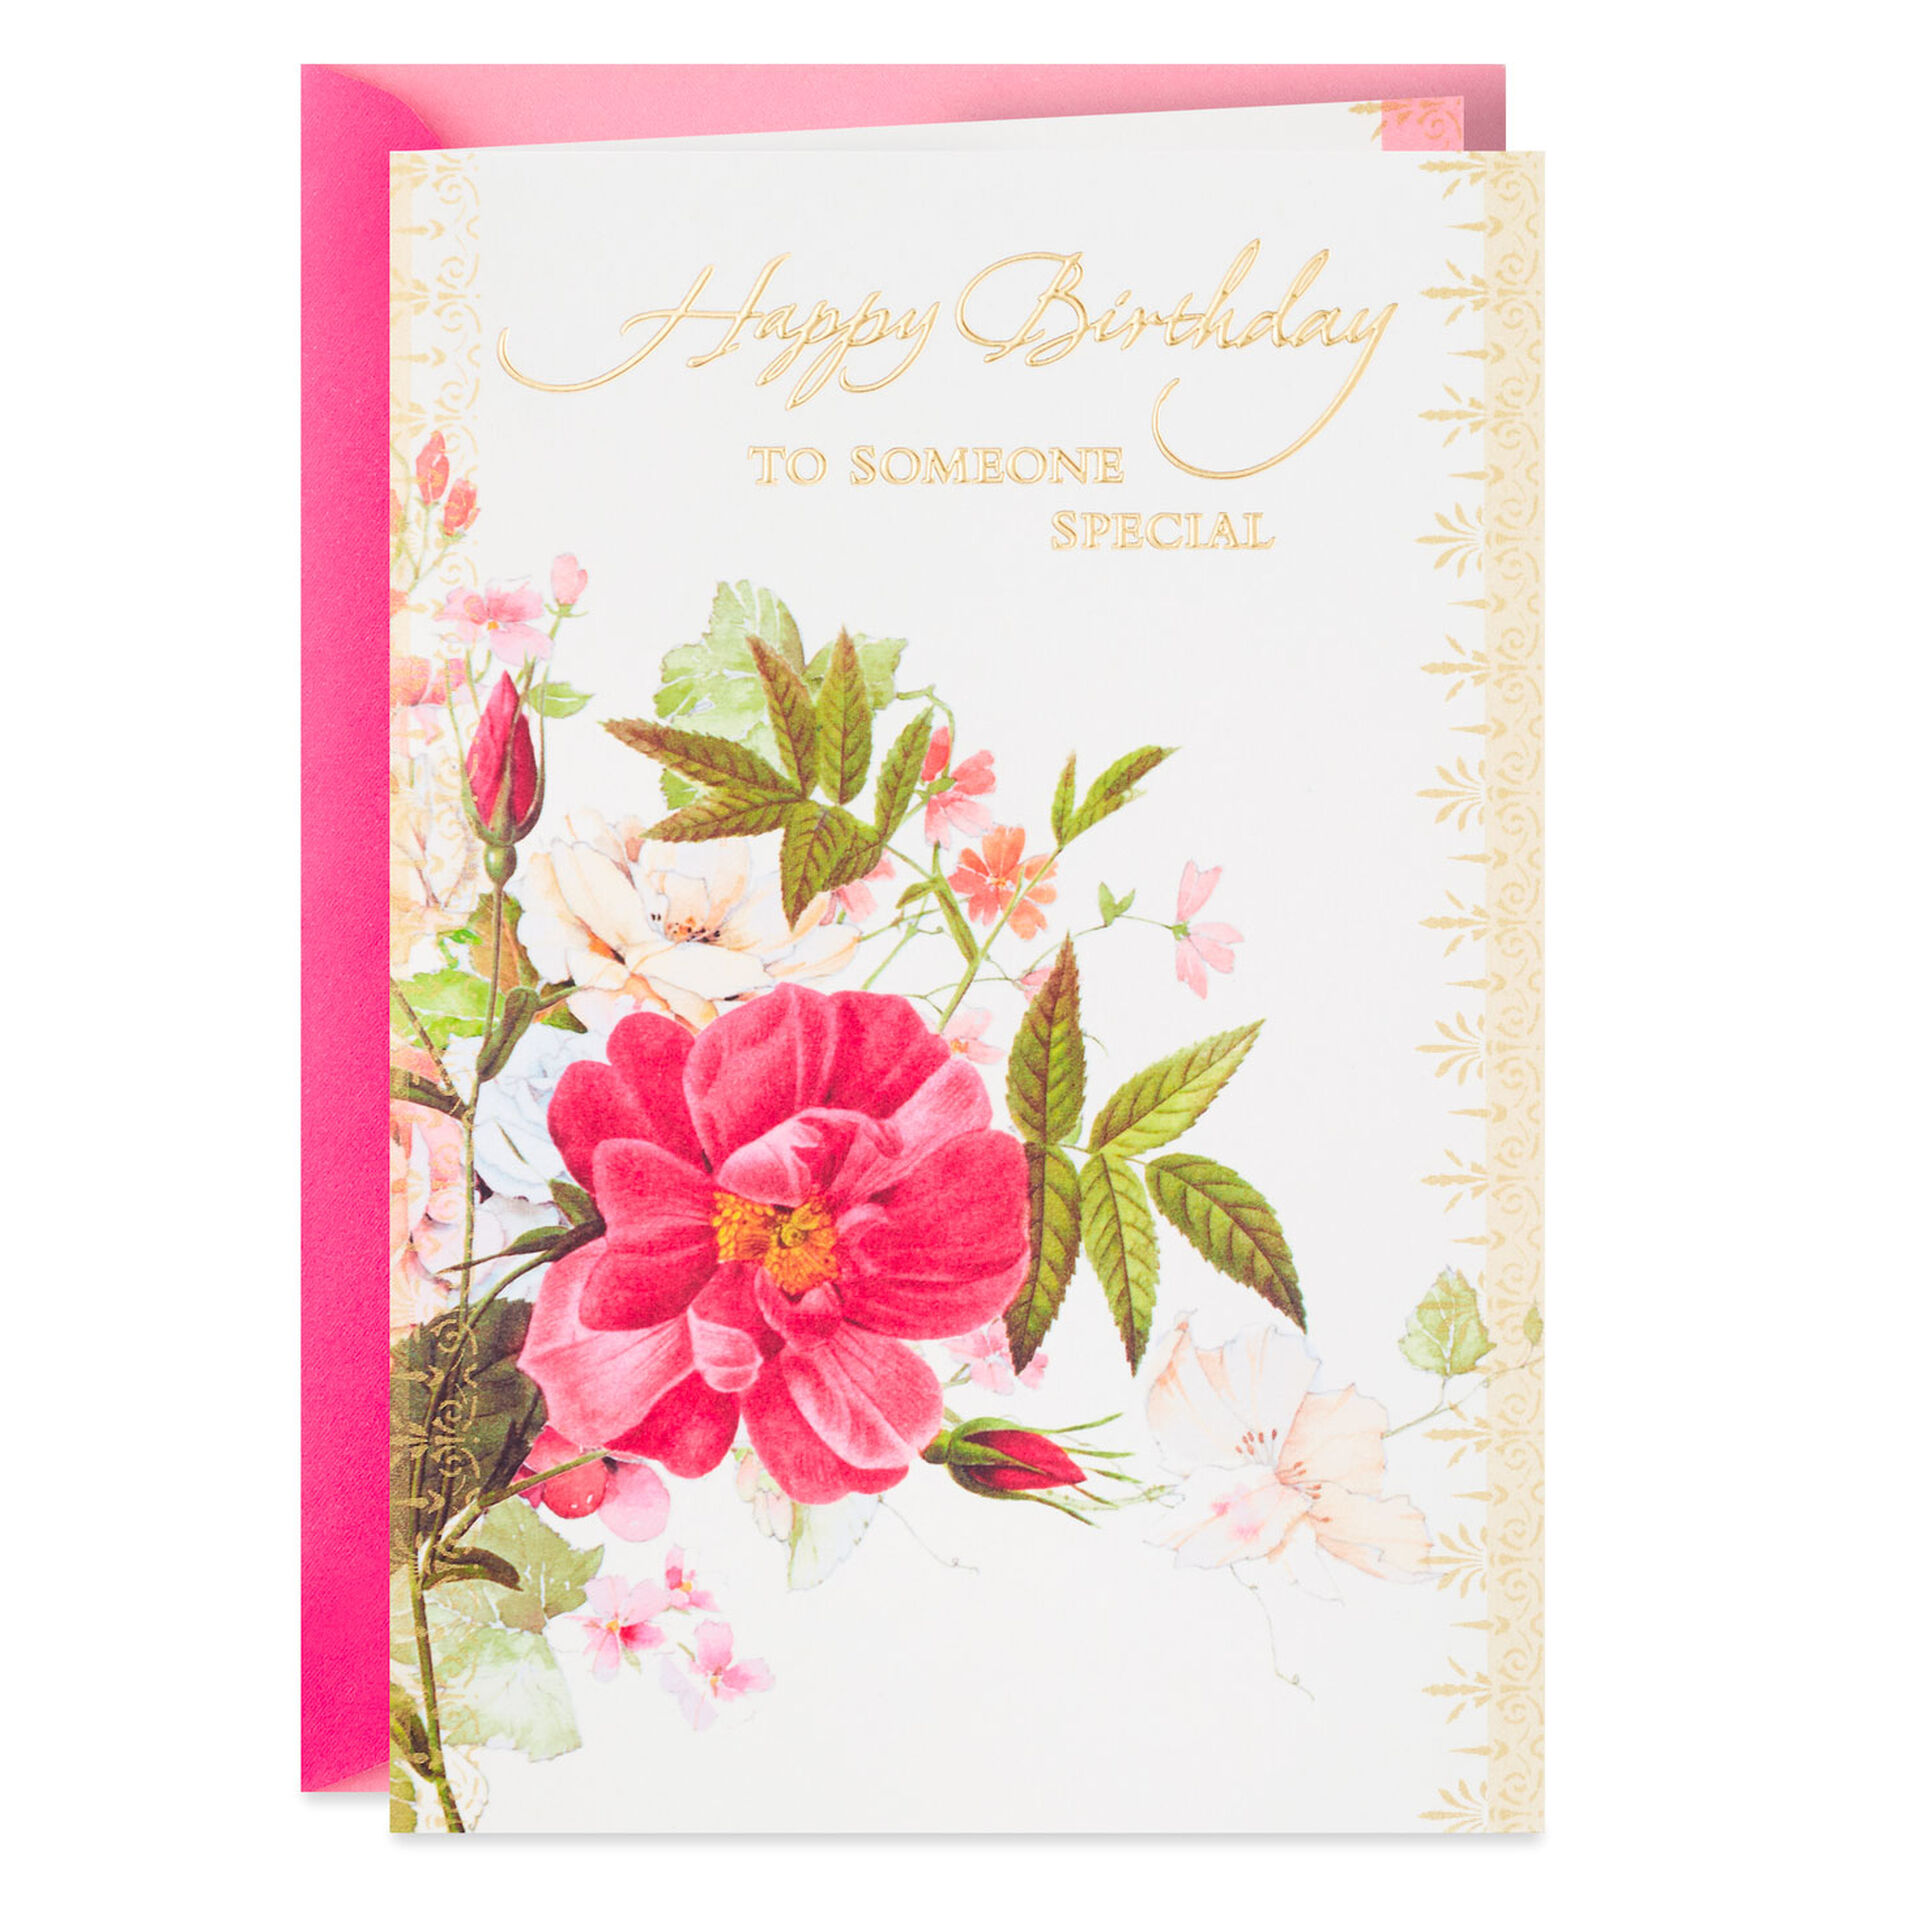 Roses-and-Wildflowers-Birthday-Card-for-Her_399HBD3975_01